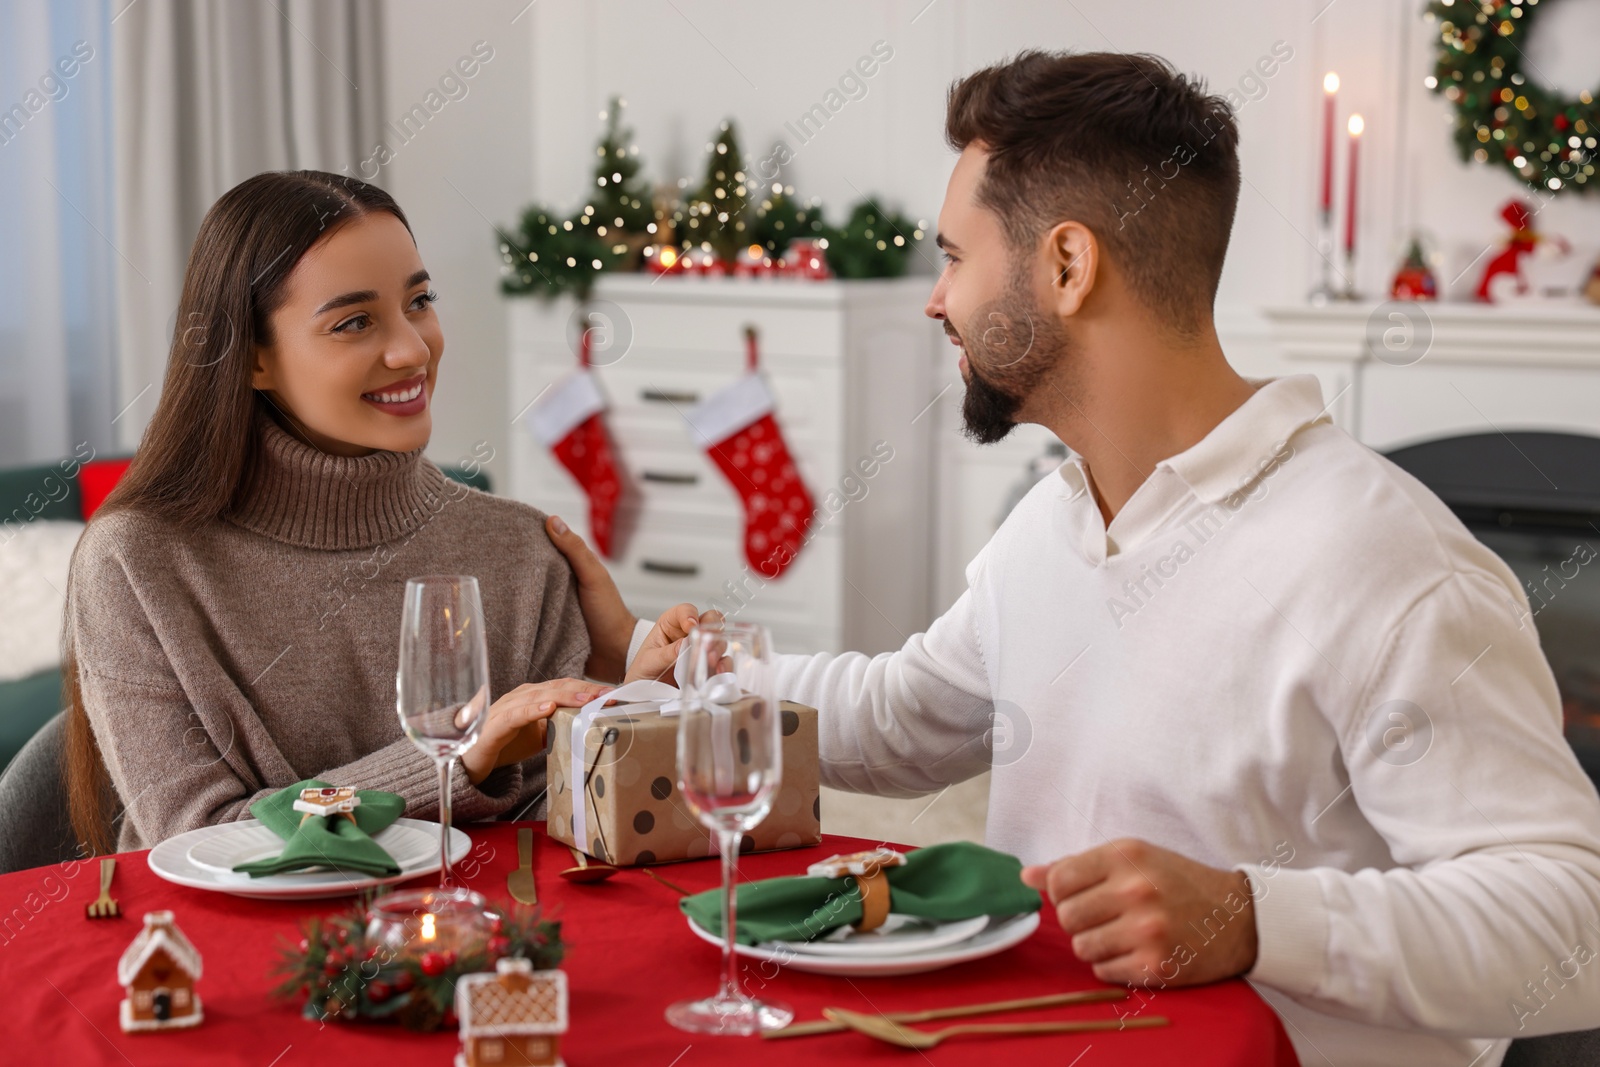 Photo of Happy young man presenting Christmas gift to his girlfriend at table indoors